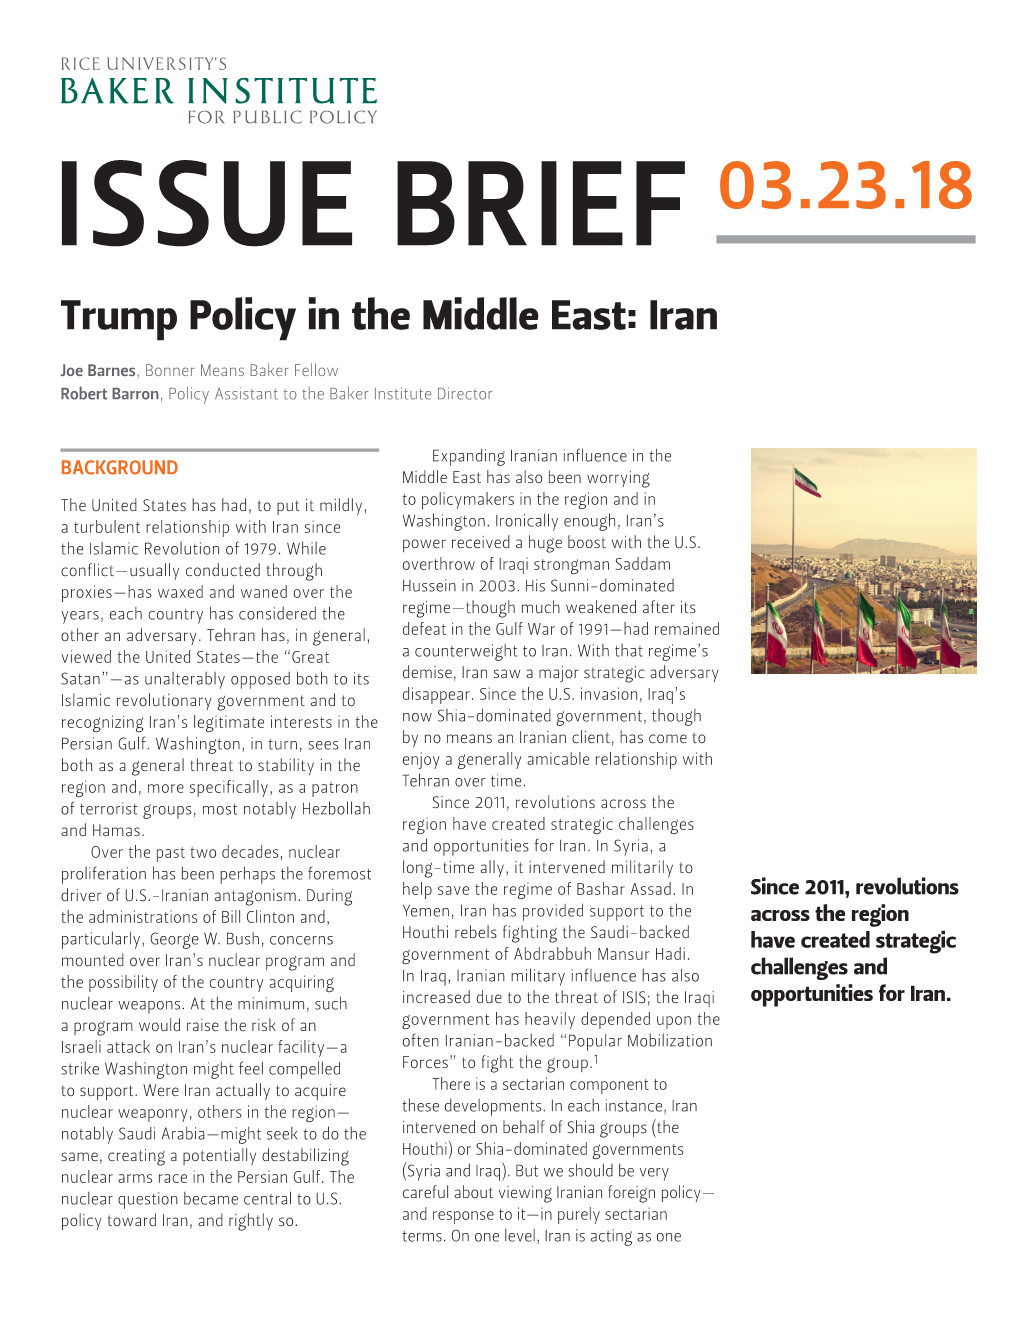 Trump Policy in the Middle East: Iran